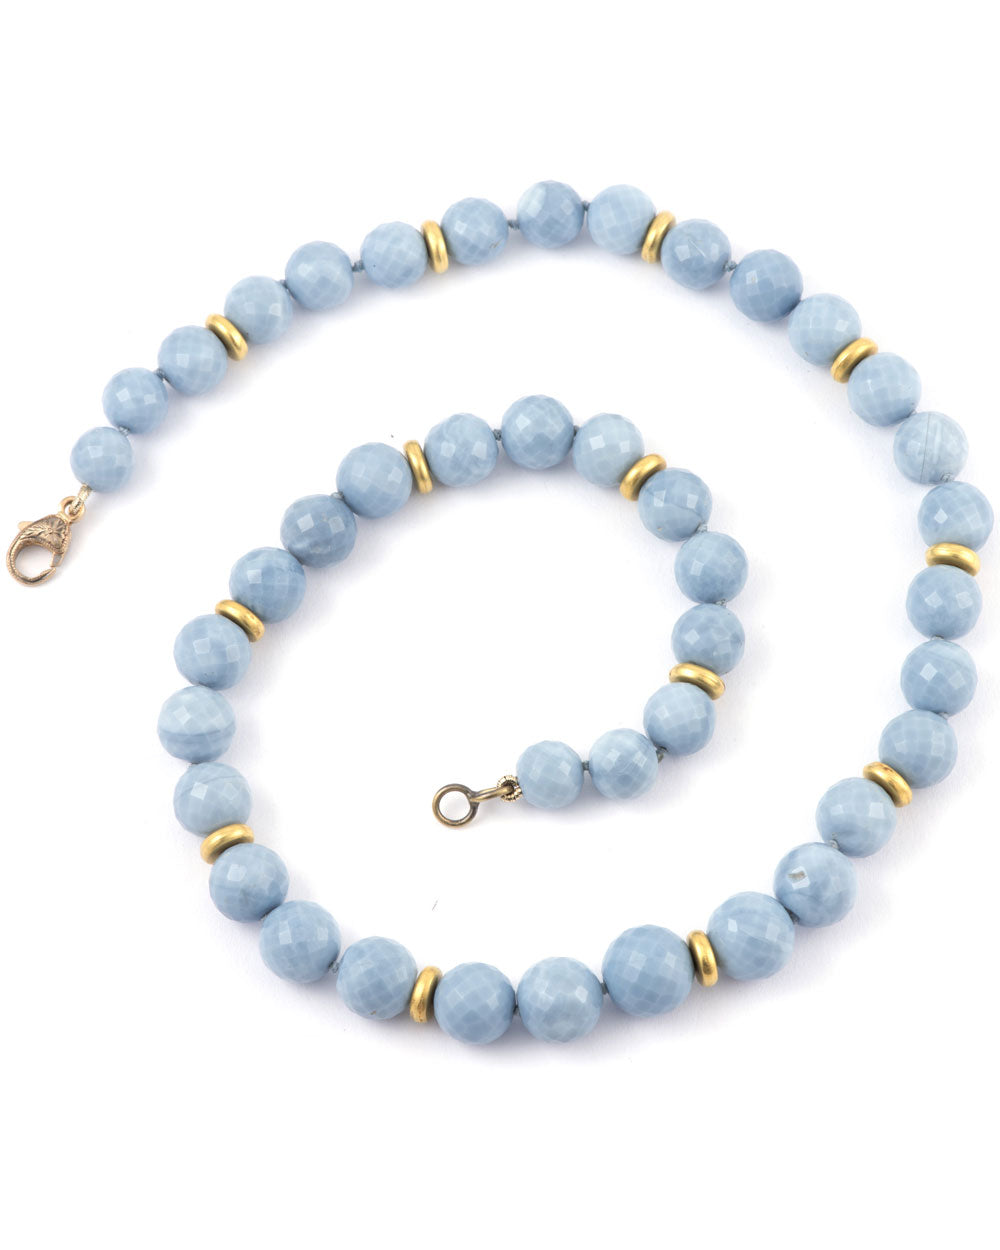 Faceted Blue Opal Bead Necklace